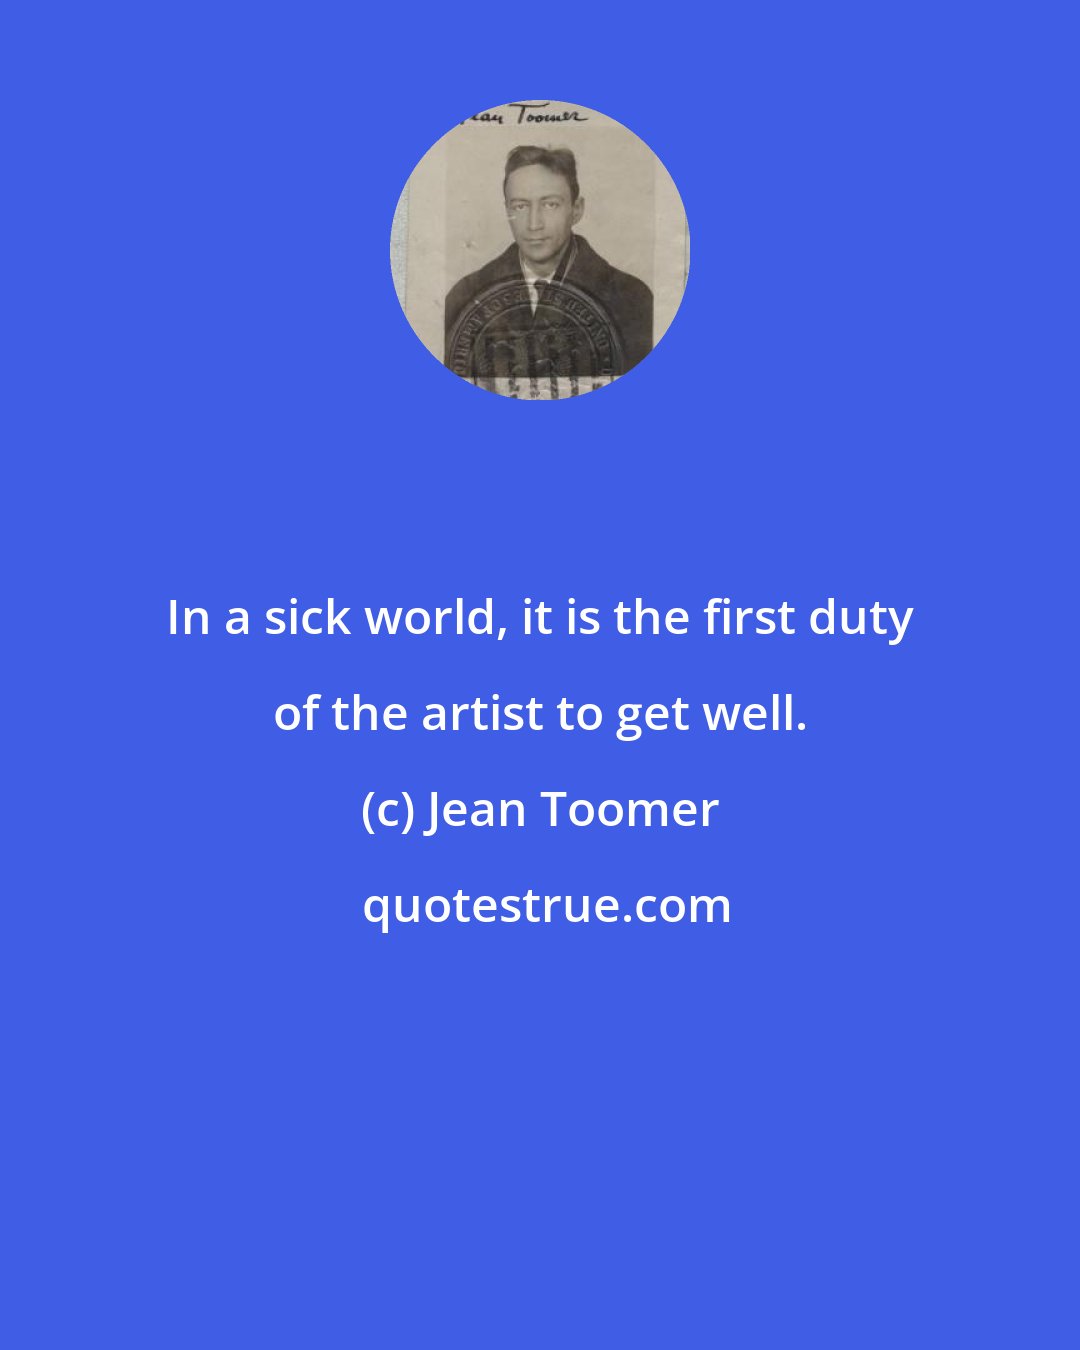 Jean Toomer: In a sick world, it is the first duty of the artist to get well.